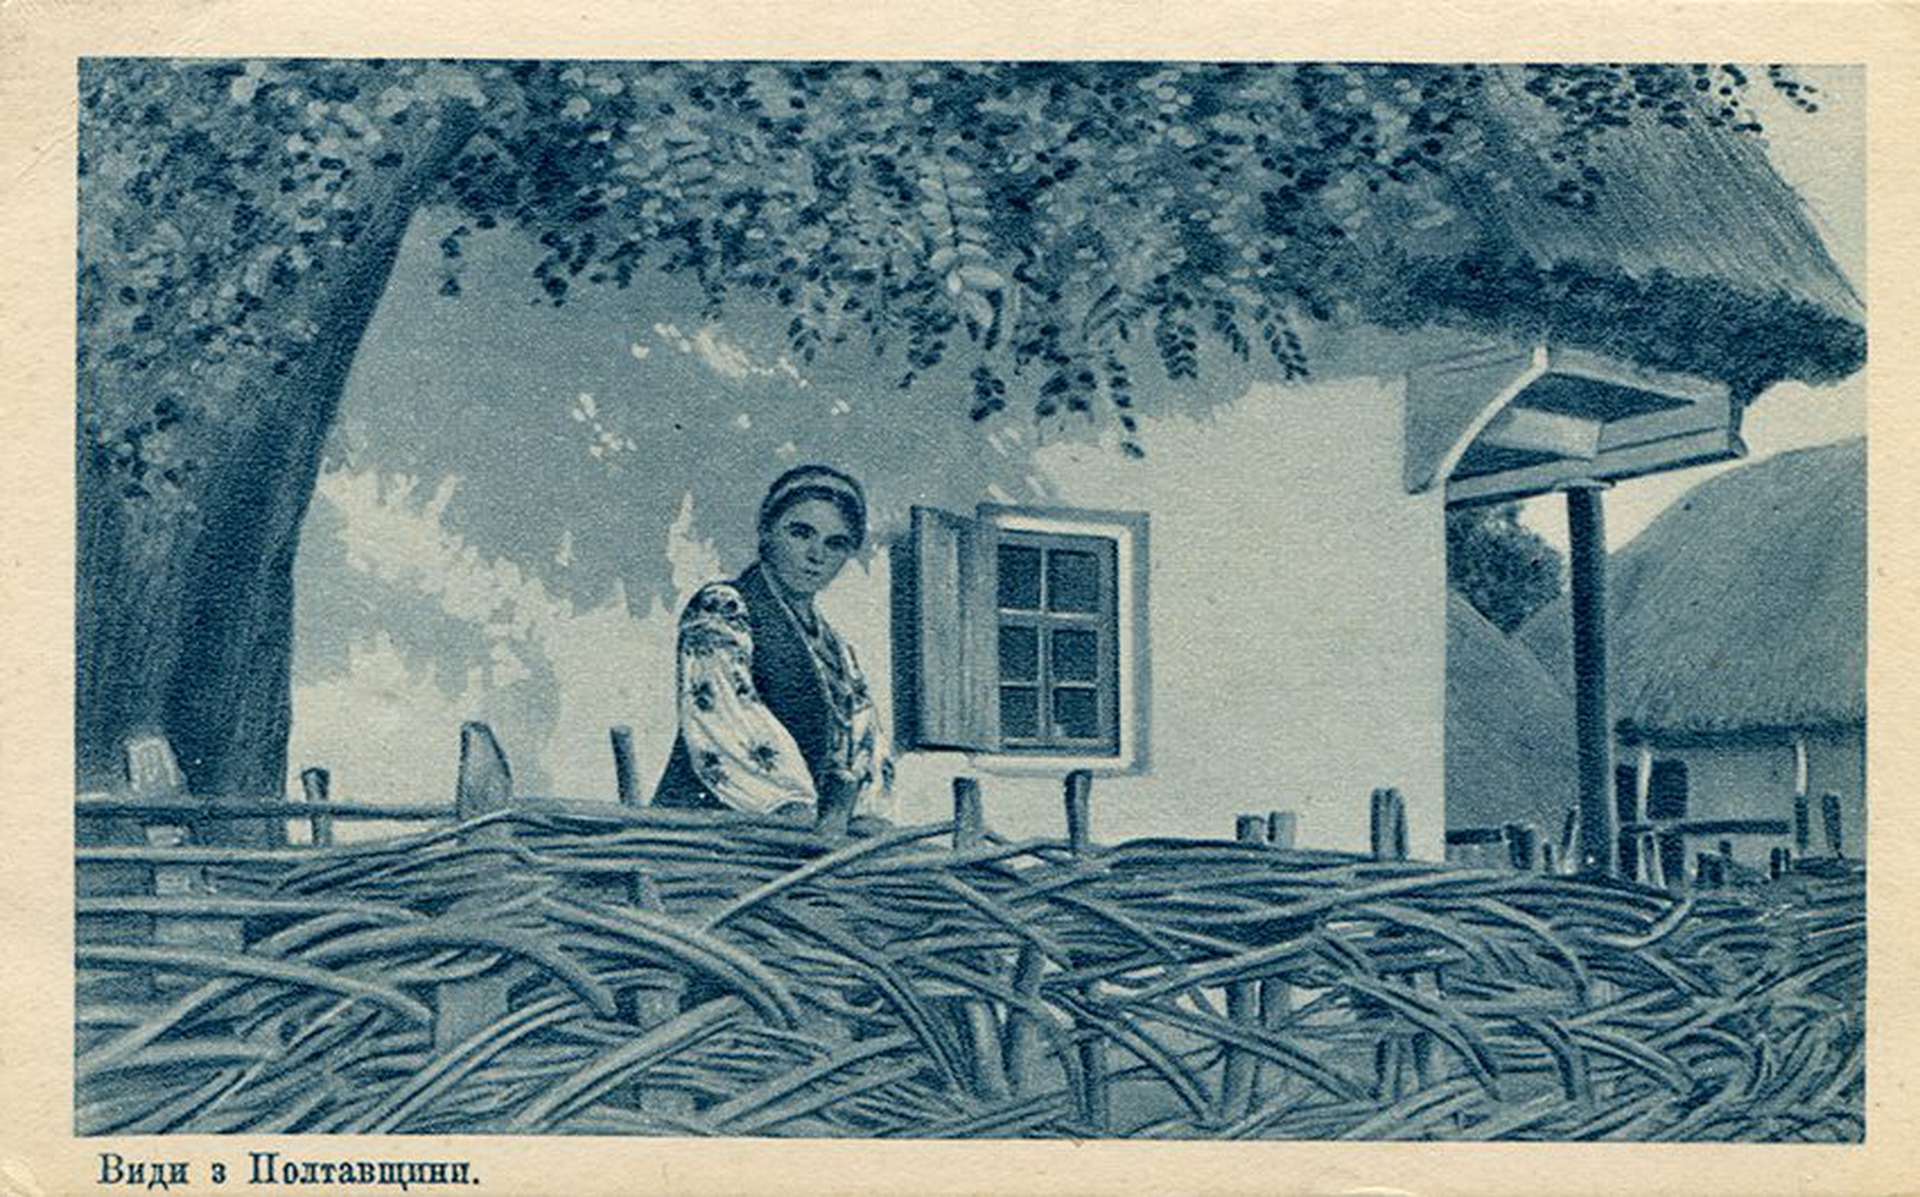 Postcard from the Series 